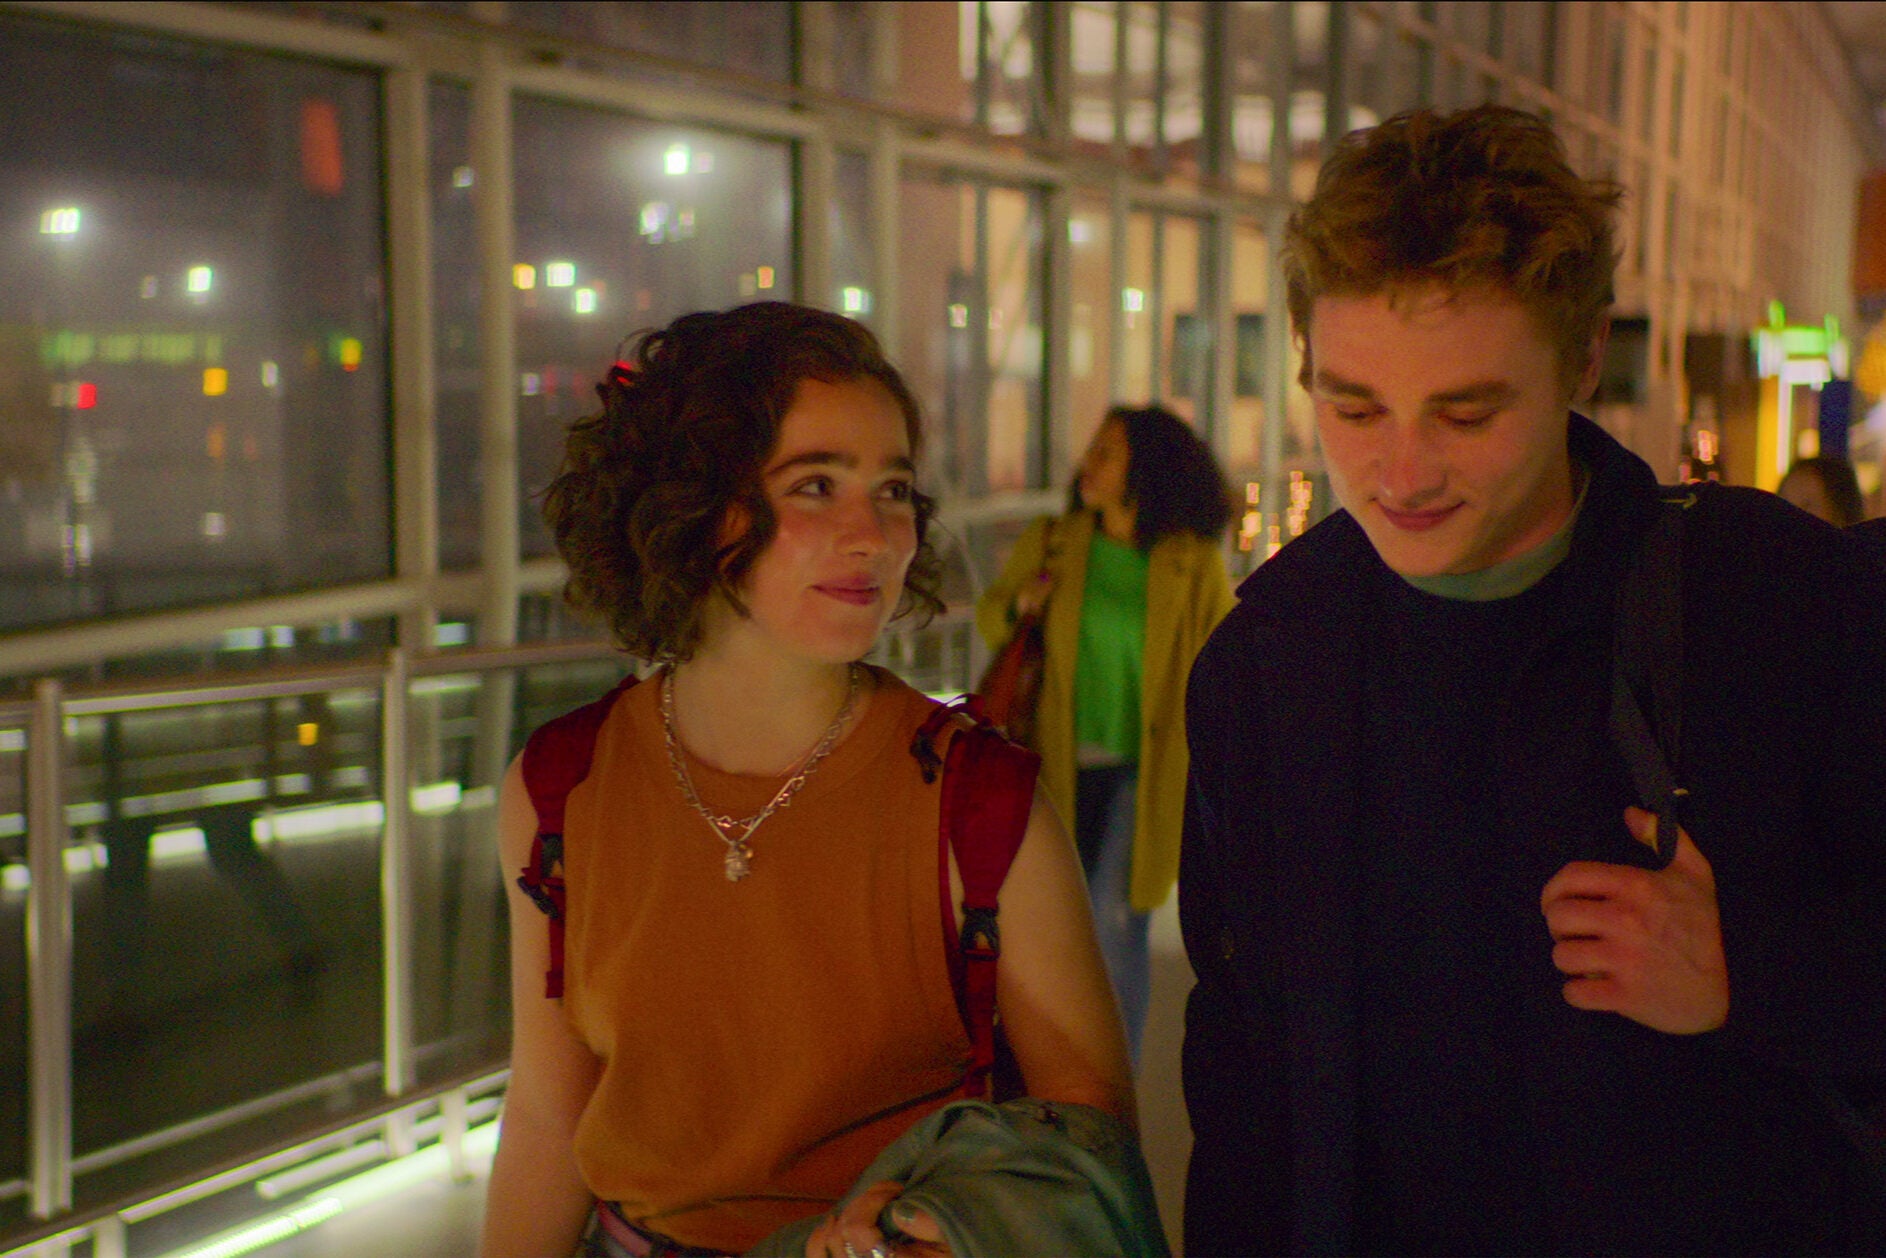 Haley Lu Richardson and Ben Hardy in "Love at First Sight."